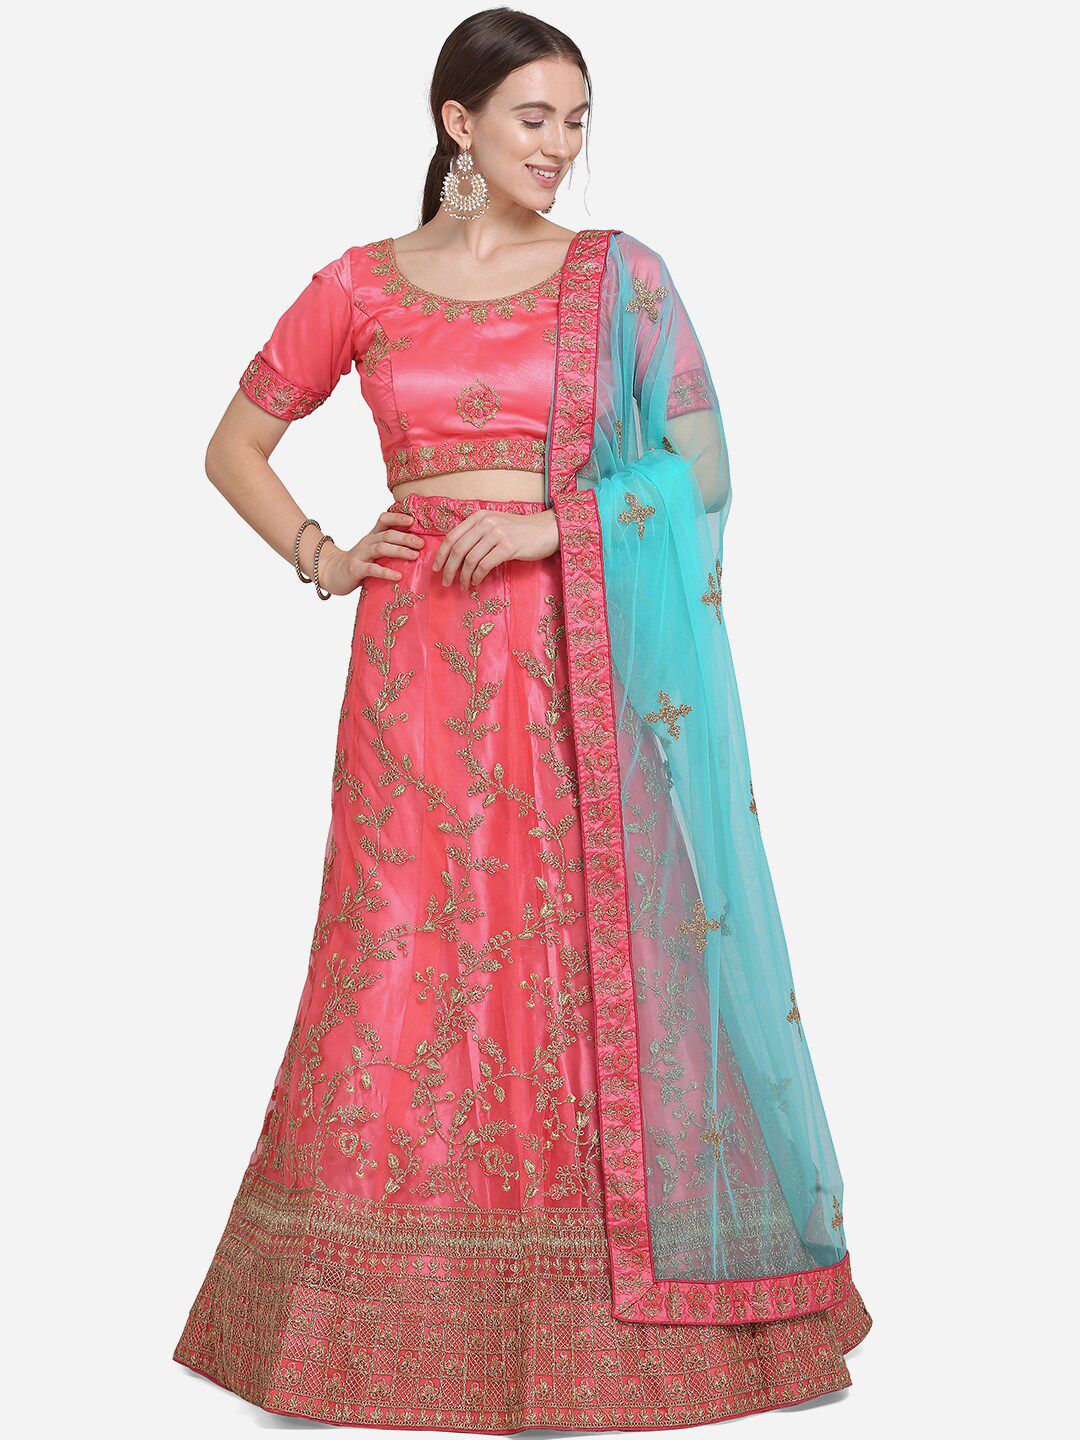 VRSALES Pink Semi-Stitched Lehenga & Blouse with Dupatta Price in India